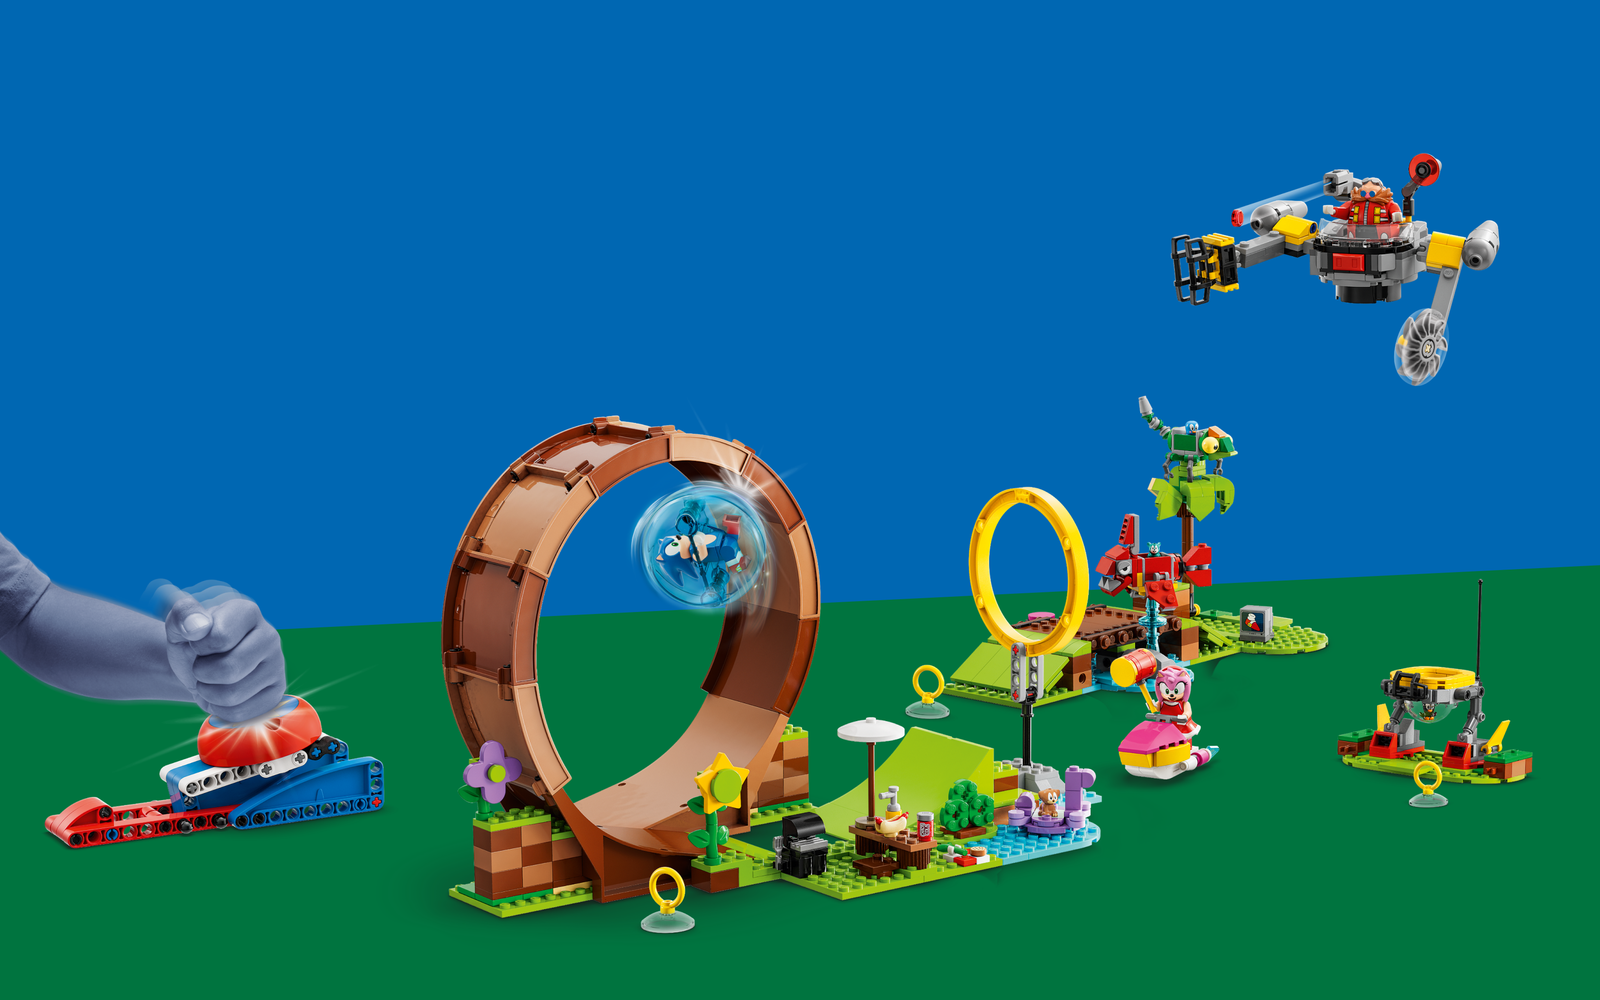 LEGO Sonic the Hedgehog - About Us 